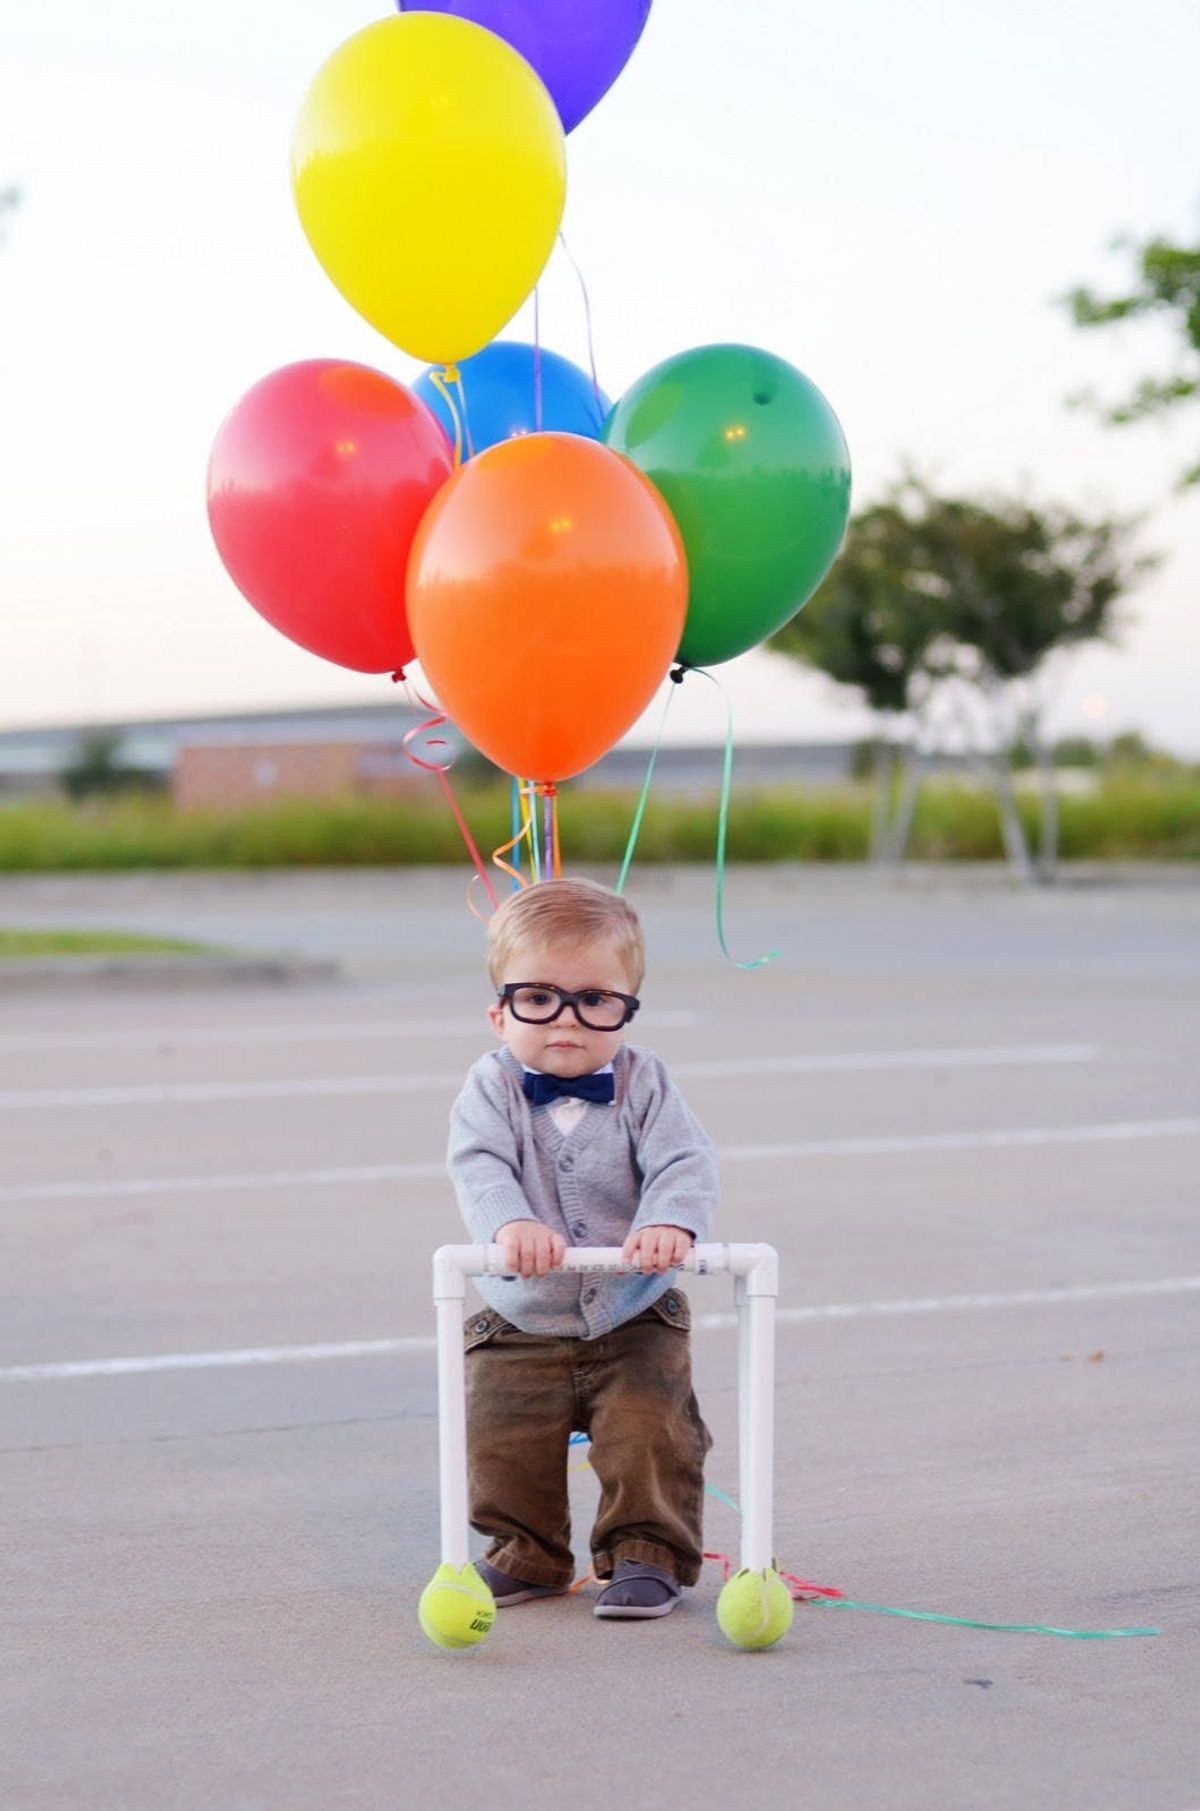 20 of Our Favorite Homemade Halloween Costumes